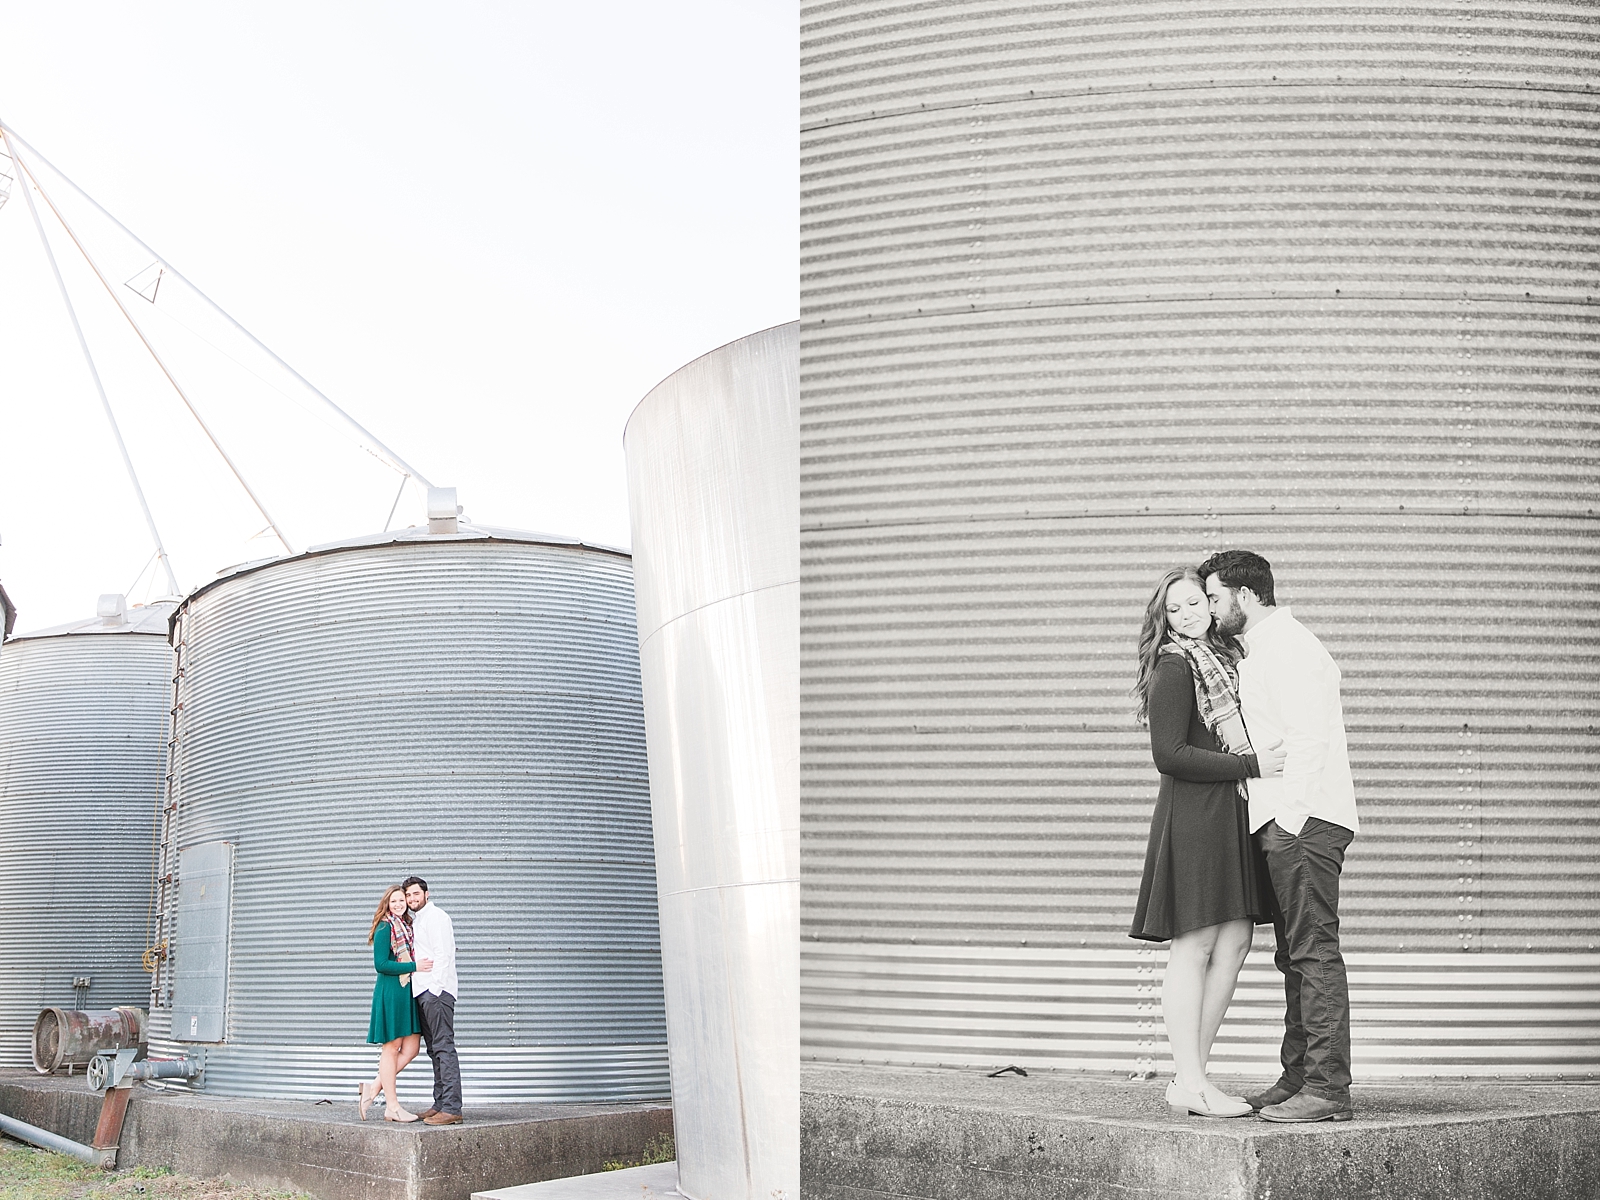 North Carolina Mountains Engagement Cassie and Evan in front of Silos and Black and White of Couple snuggling Photos